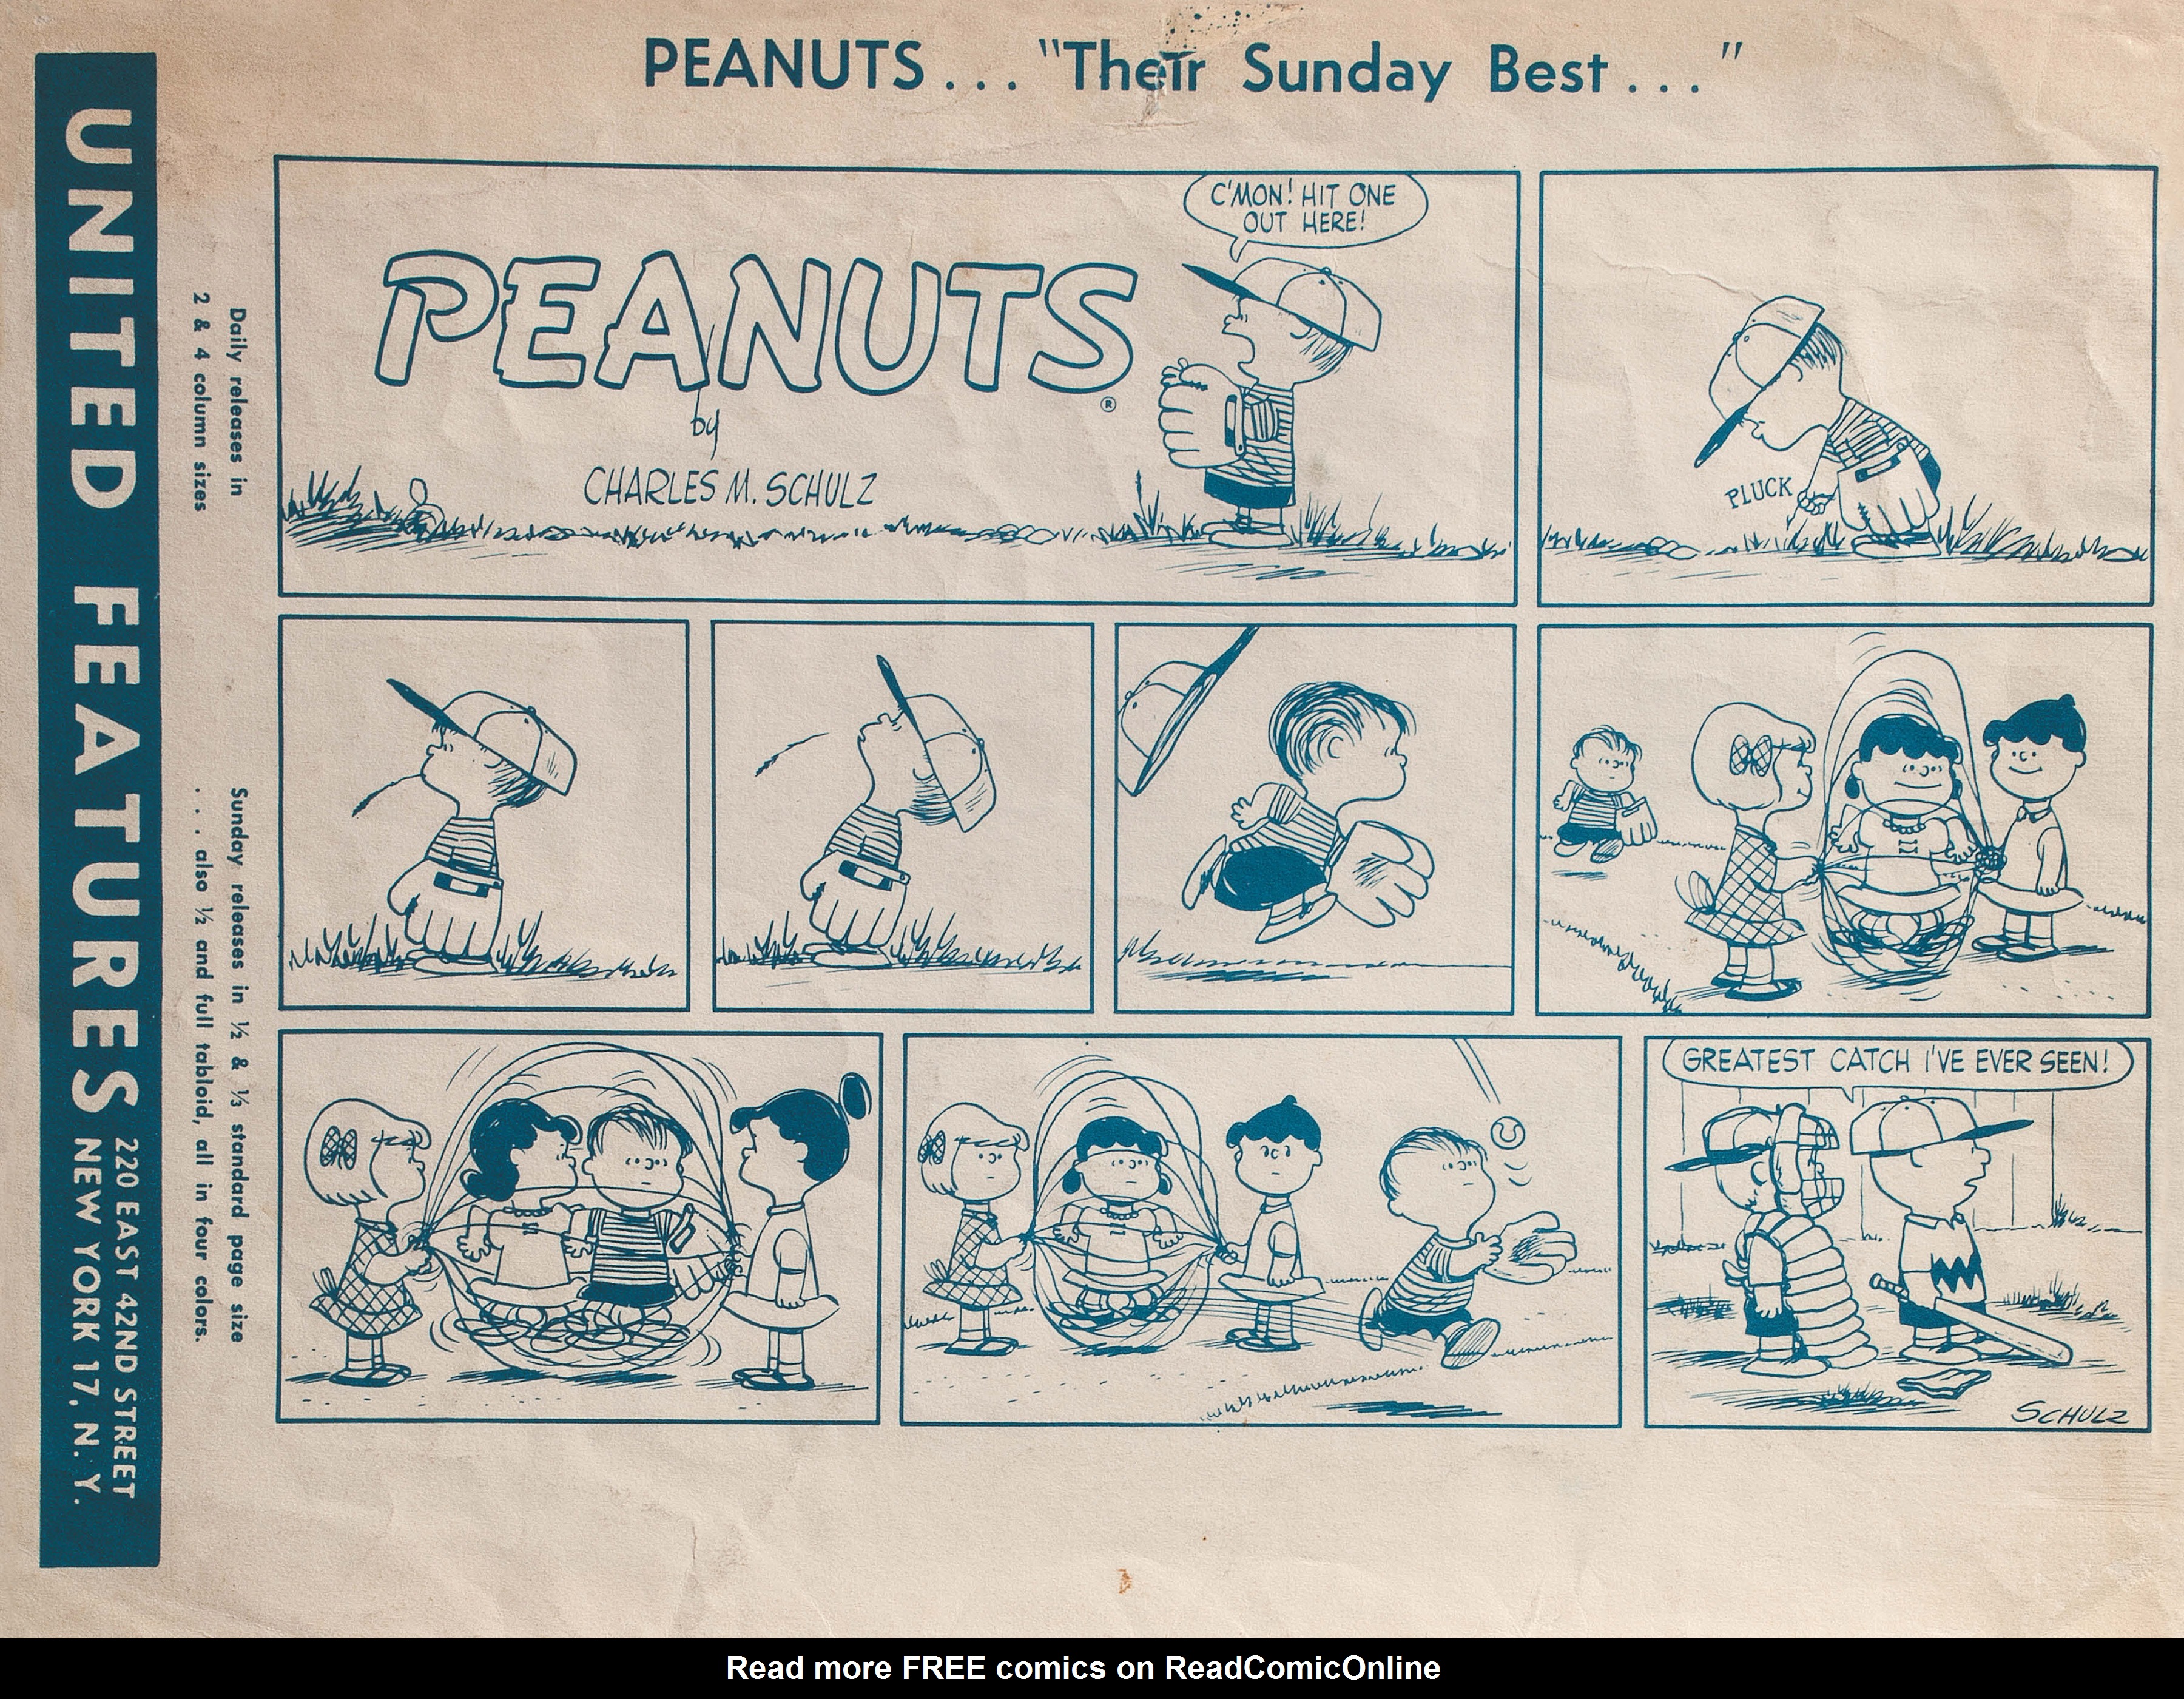 Read online Only What's Necessary: Charles M. Schulz and the Art of Peanuts comic -  Issue # TPB (Part 2) - 18